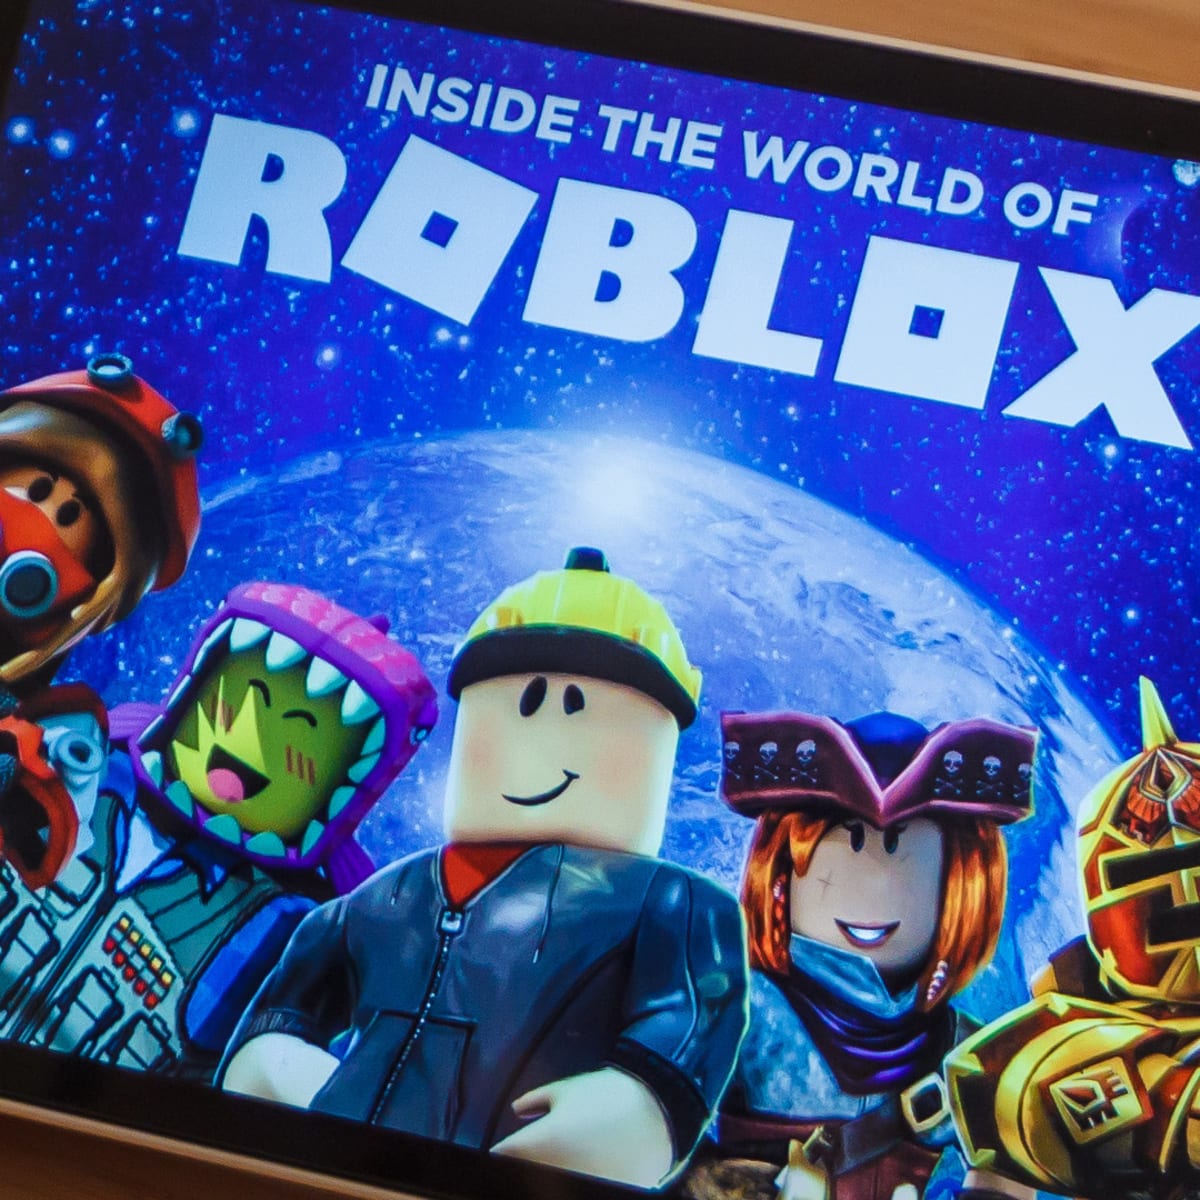 Game Platform Roblox Files Confidentially For Public Listing Thestreet - roblox lilly s games